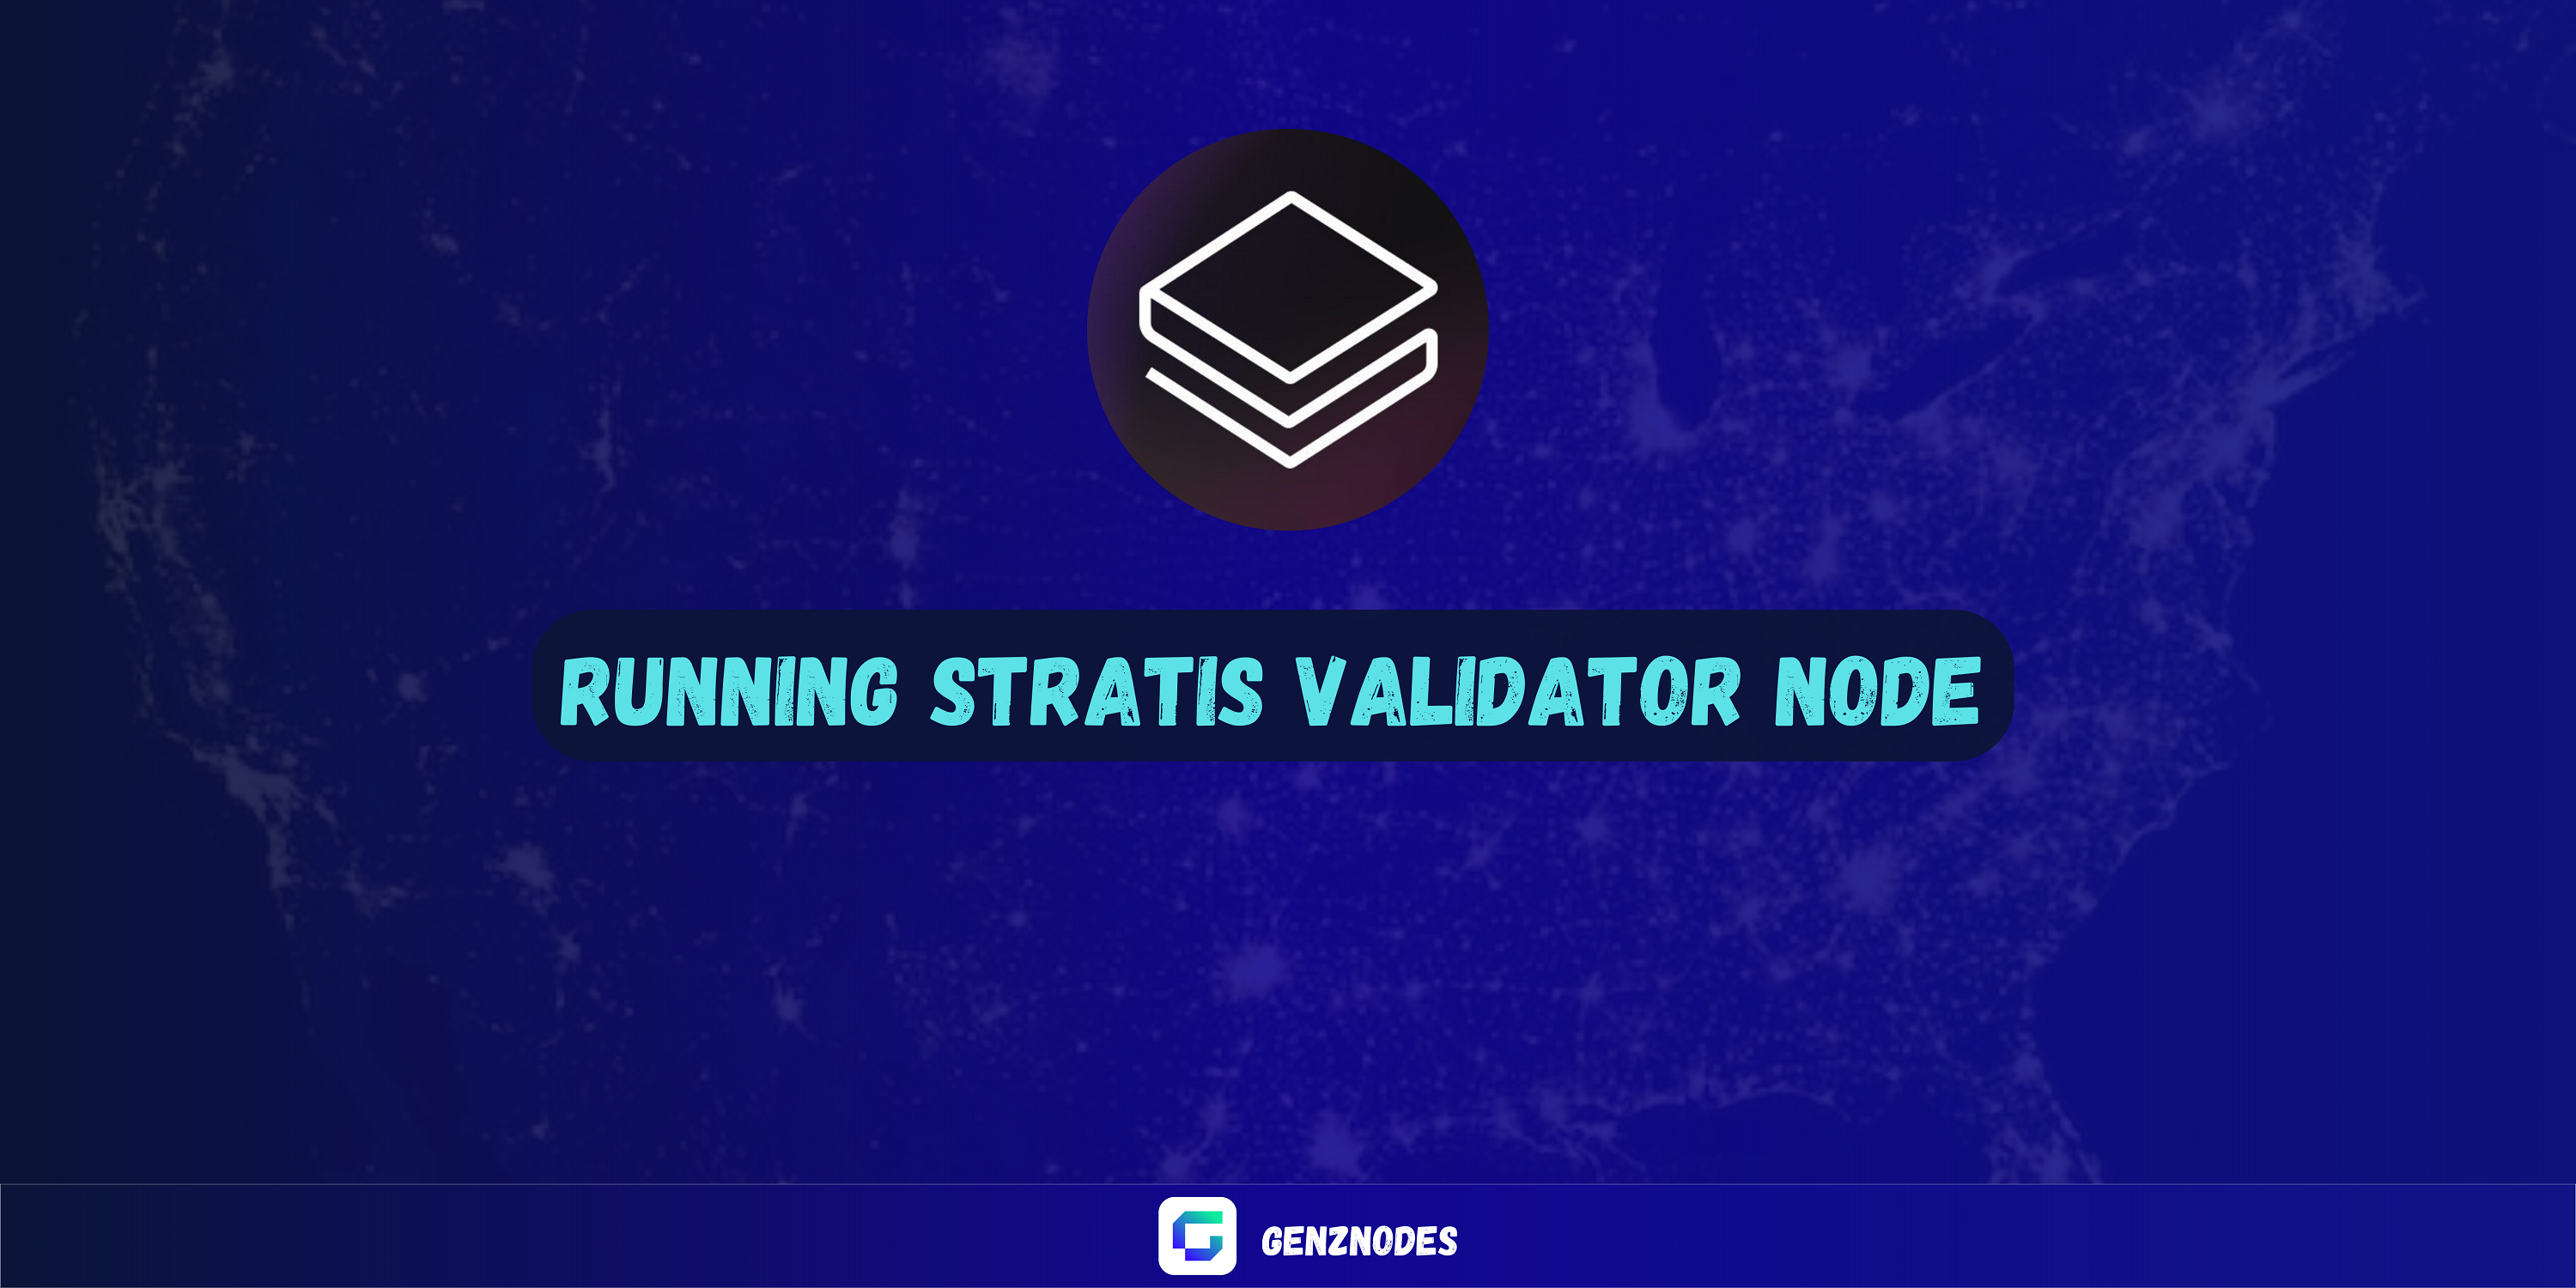 By running a validator, you'll be responsible for securing the network and receive continuous payouts for actions that help the network reach consensus.